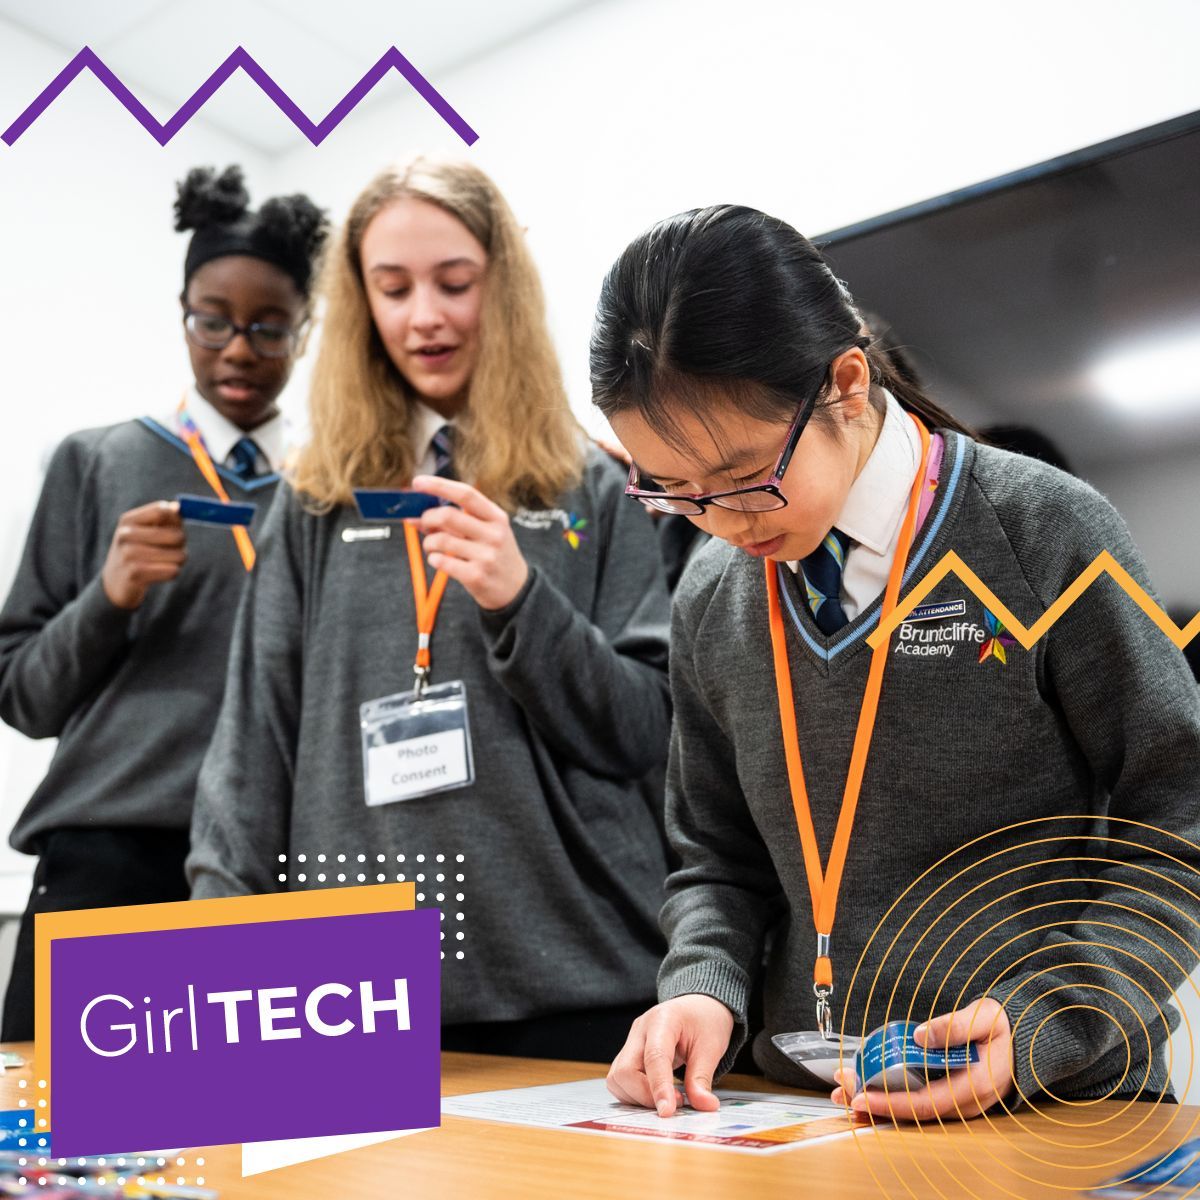 👩‍💻According to PWC only 3% of women say a career in technology is their first choice. Join us at Girl Tech Leeds to show the next generation there is a place for them within the tech and digital sector. #GirlTechLeeds #TechCareers Find out more >> buff.ly/4a7VJCj